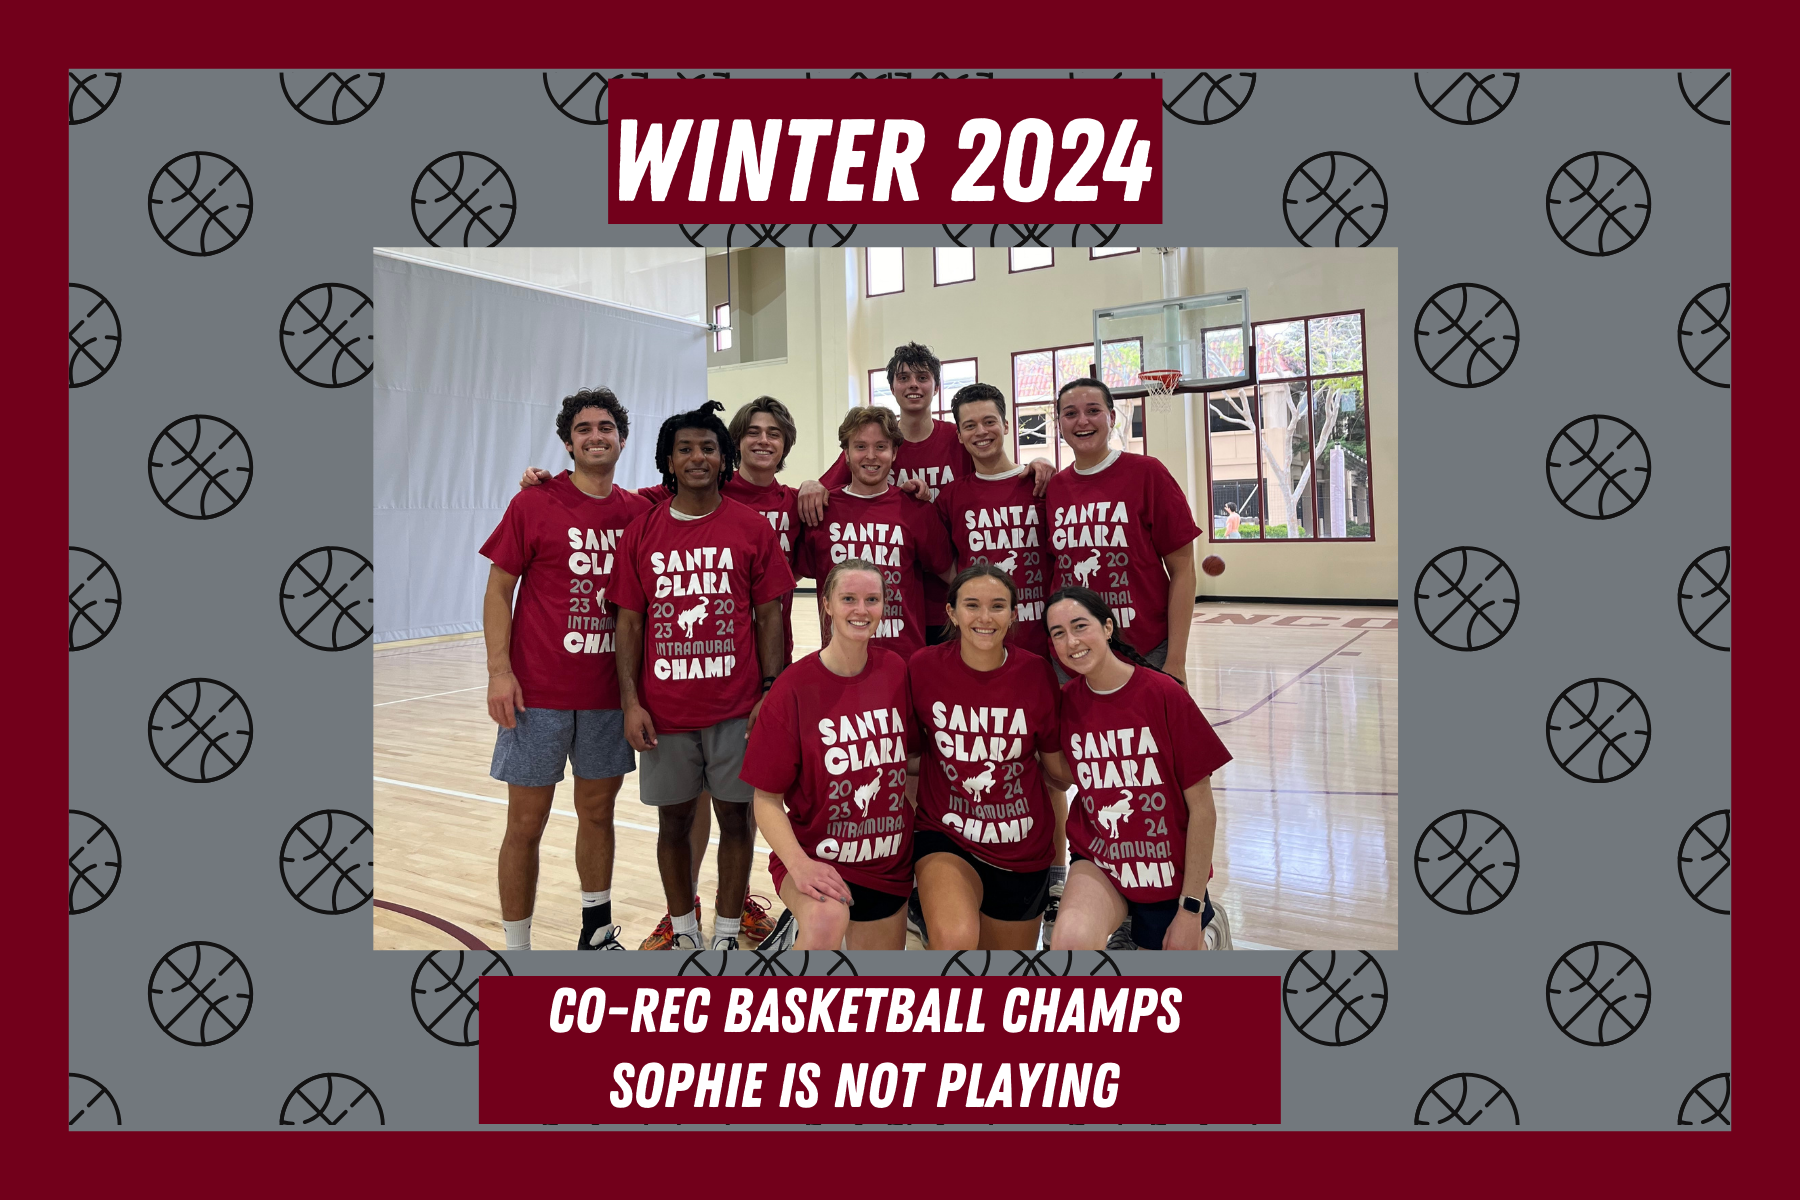 Picture of Co-Rec basketball champions with their IM Champion T Shirts in the Malley Center basketball courts.